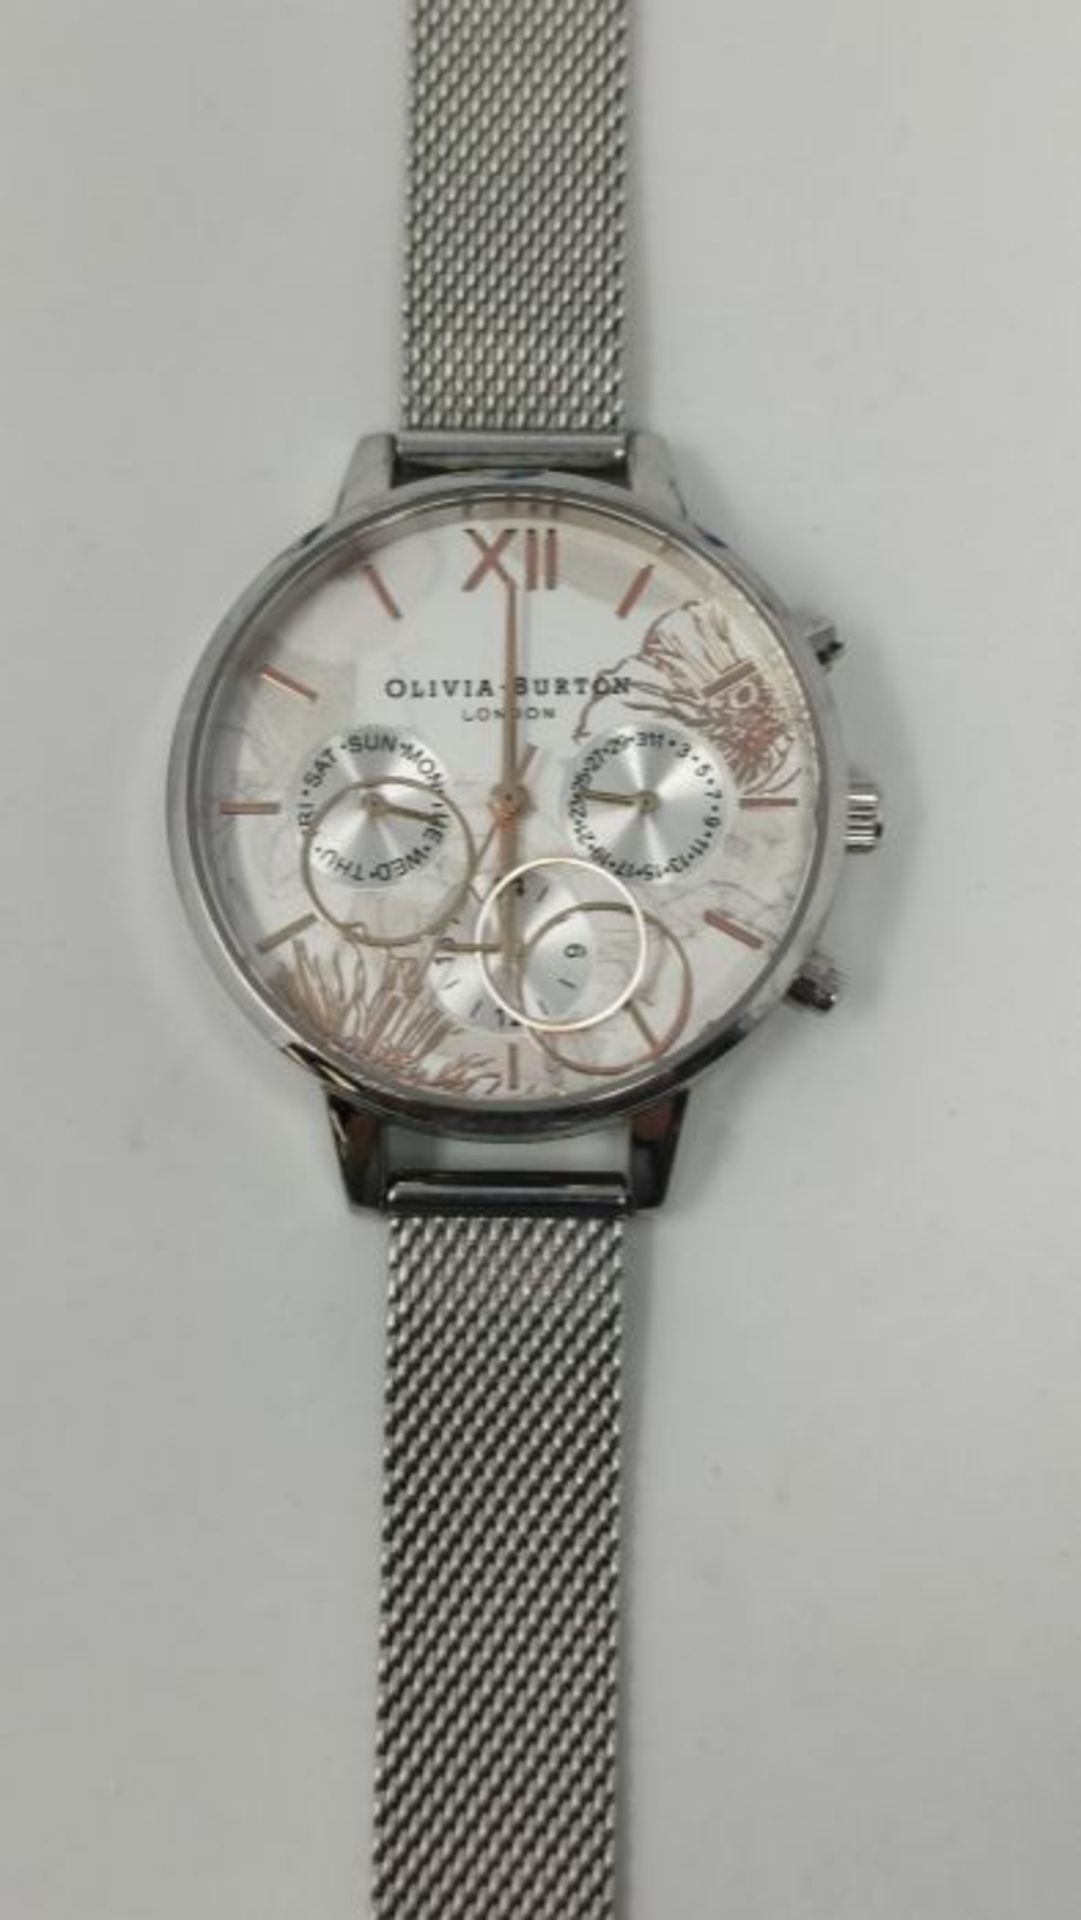 RRP £119.00 Olivia Burton Women's Analogue Japanese Quartz Watch with Stainless Steel Strap OB16CG - Image 3 of 3